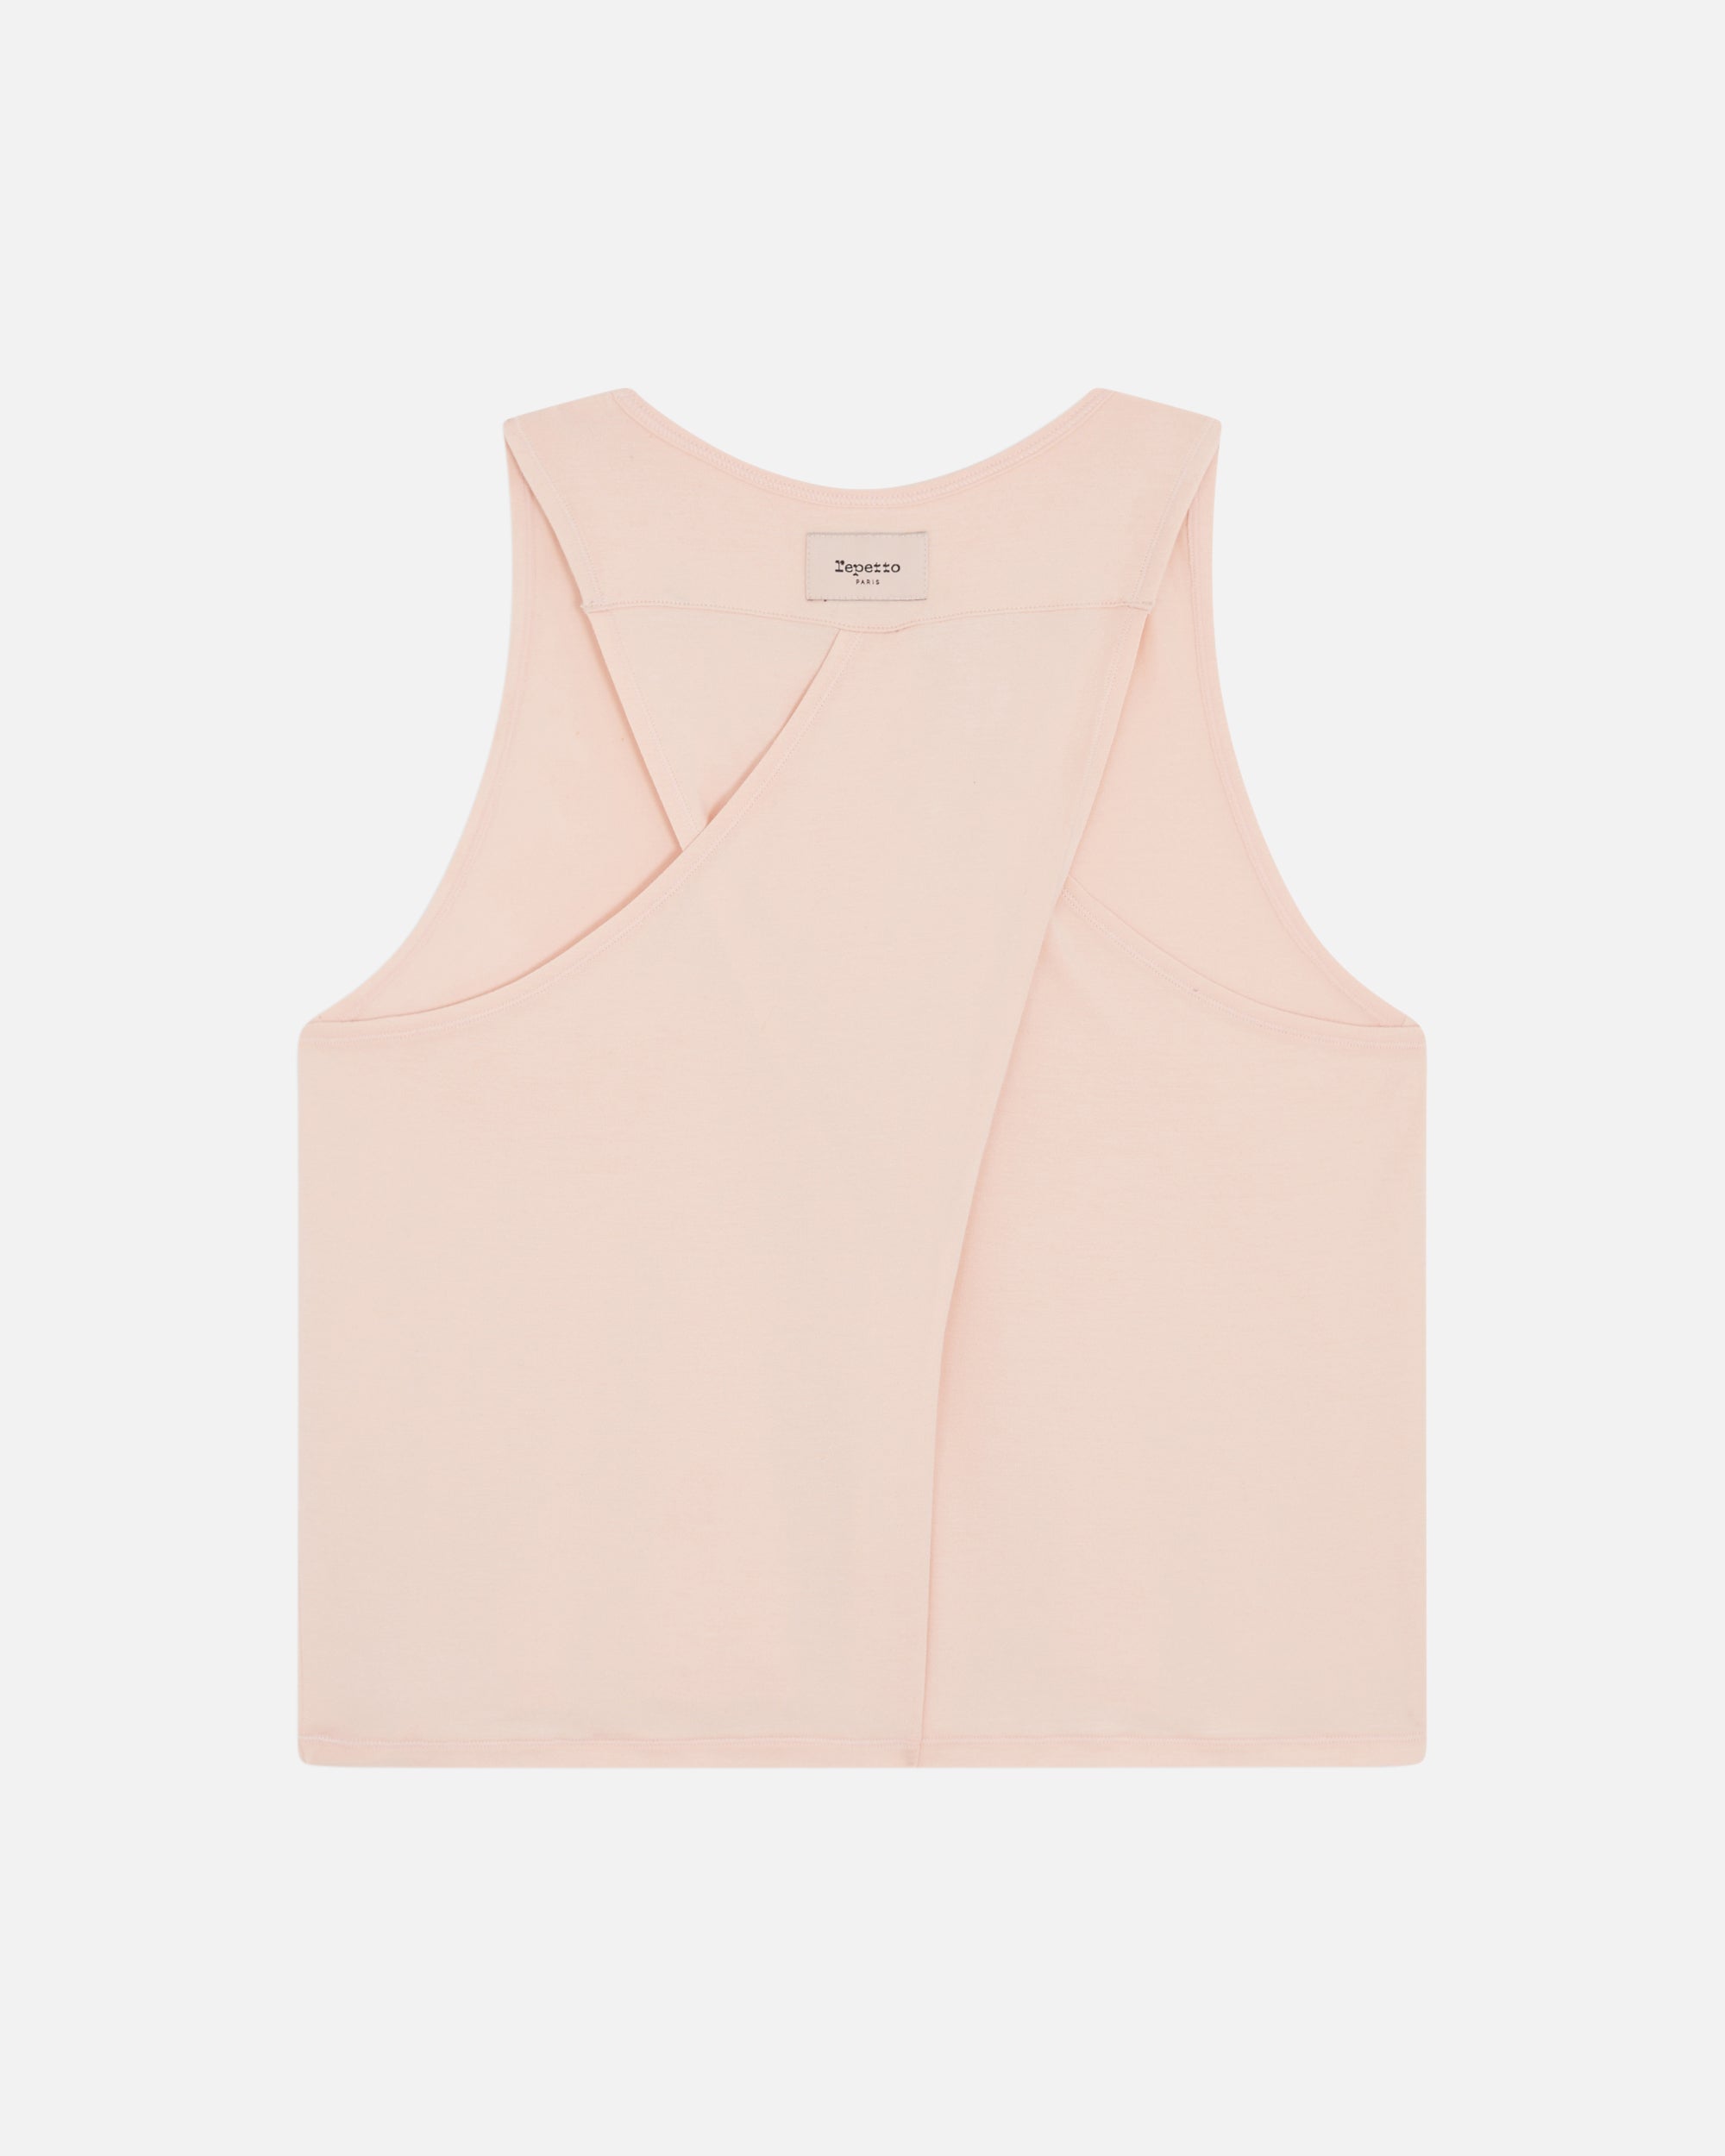 Tops & T-Shirts  Graphic Seamless Tank Top Pearl Grey And Sorbet Pink -  Repetto Womens ⋆ HostnDost